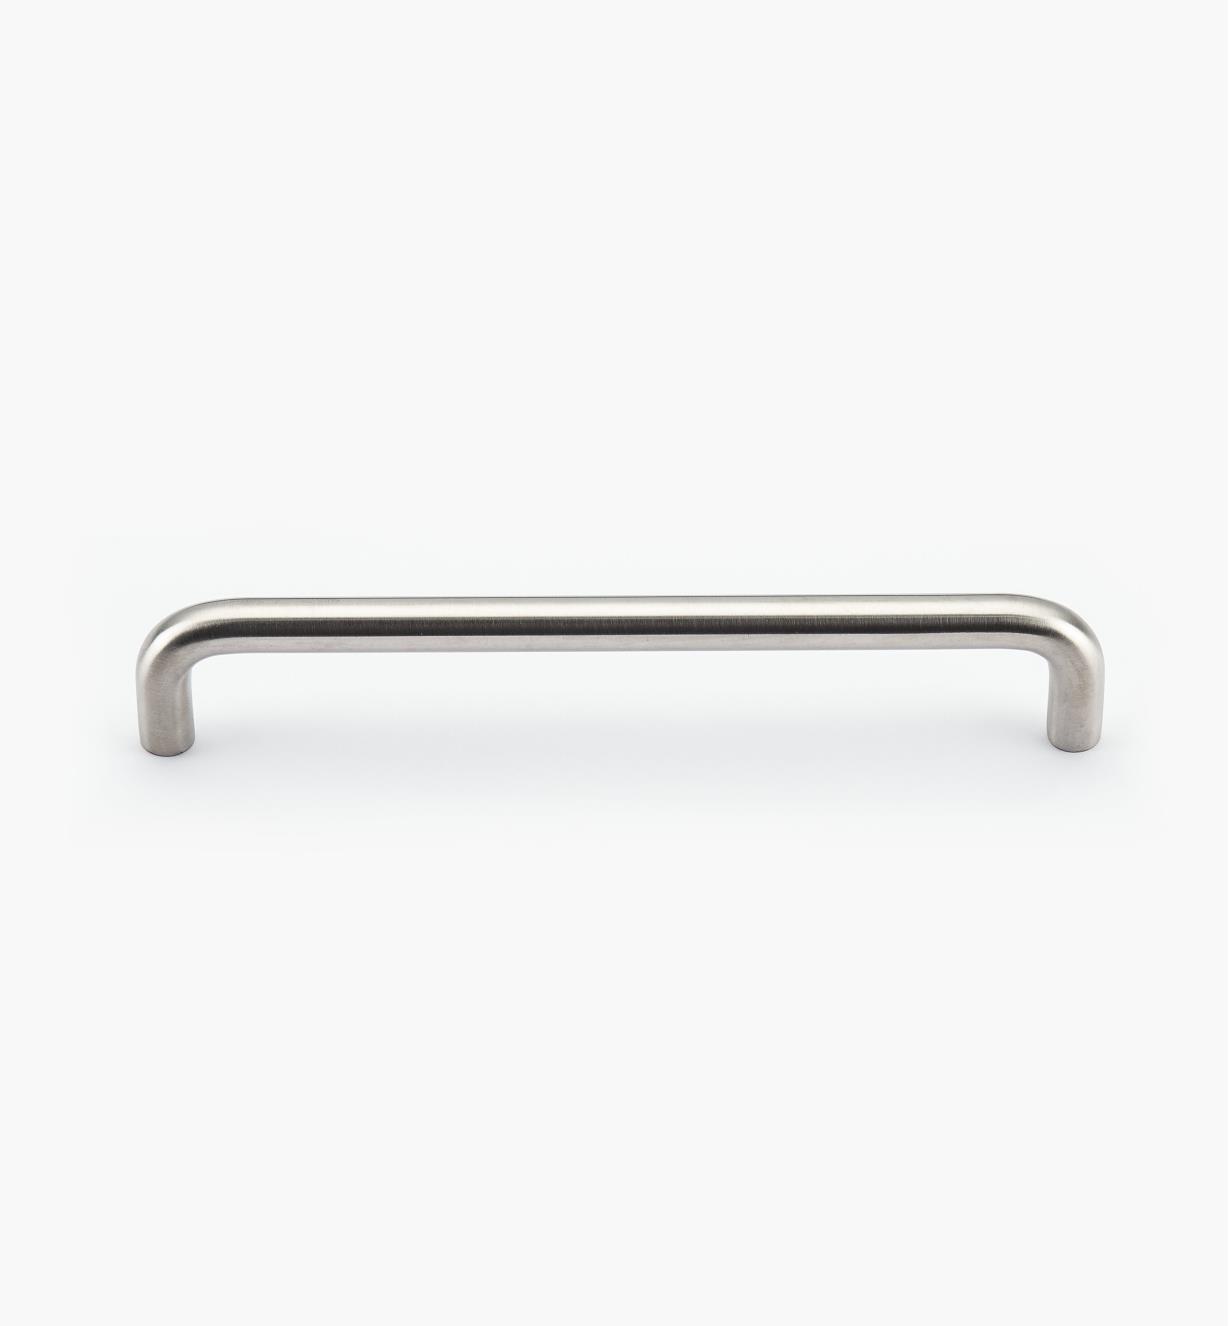 01W6857 - 10mm x 160mm Stainless-Steel Wire Pull